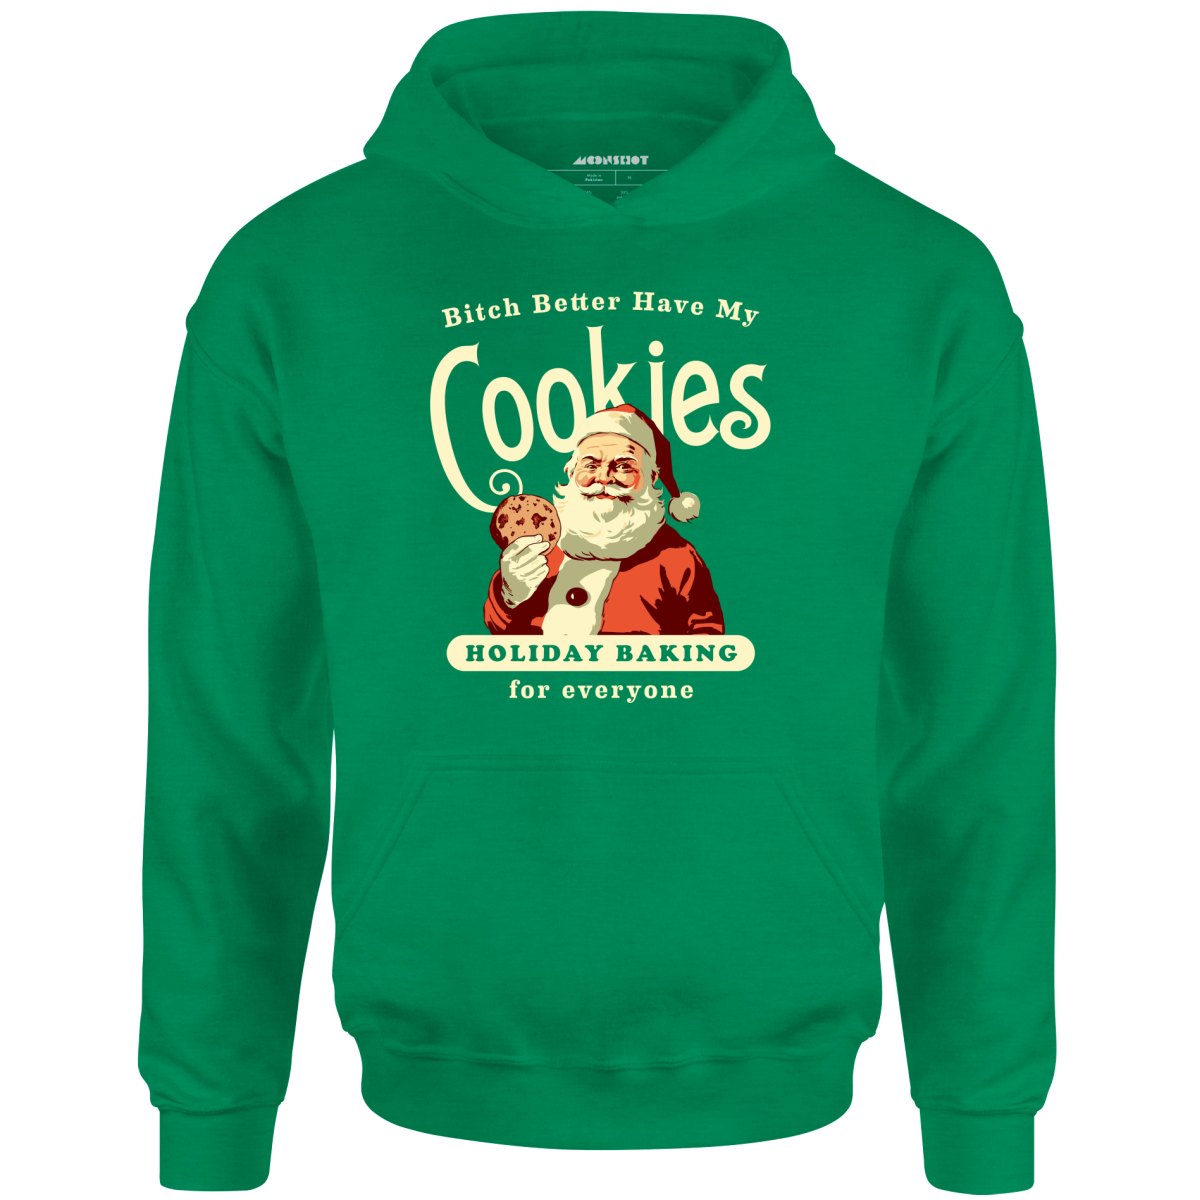 Bitch Better Have My Cookies Holiday Baking - Unisex Hoodie